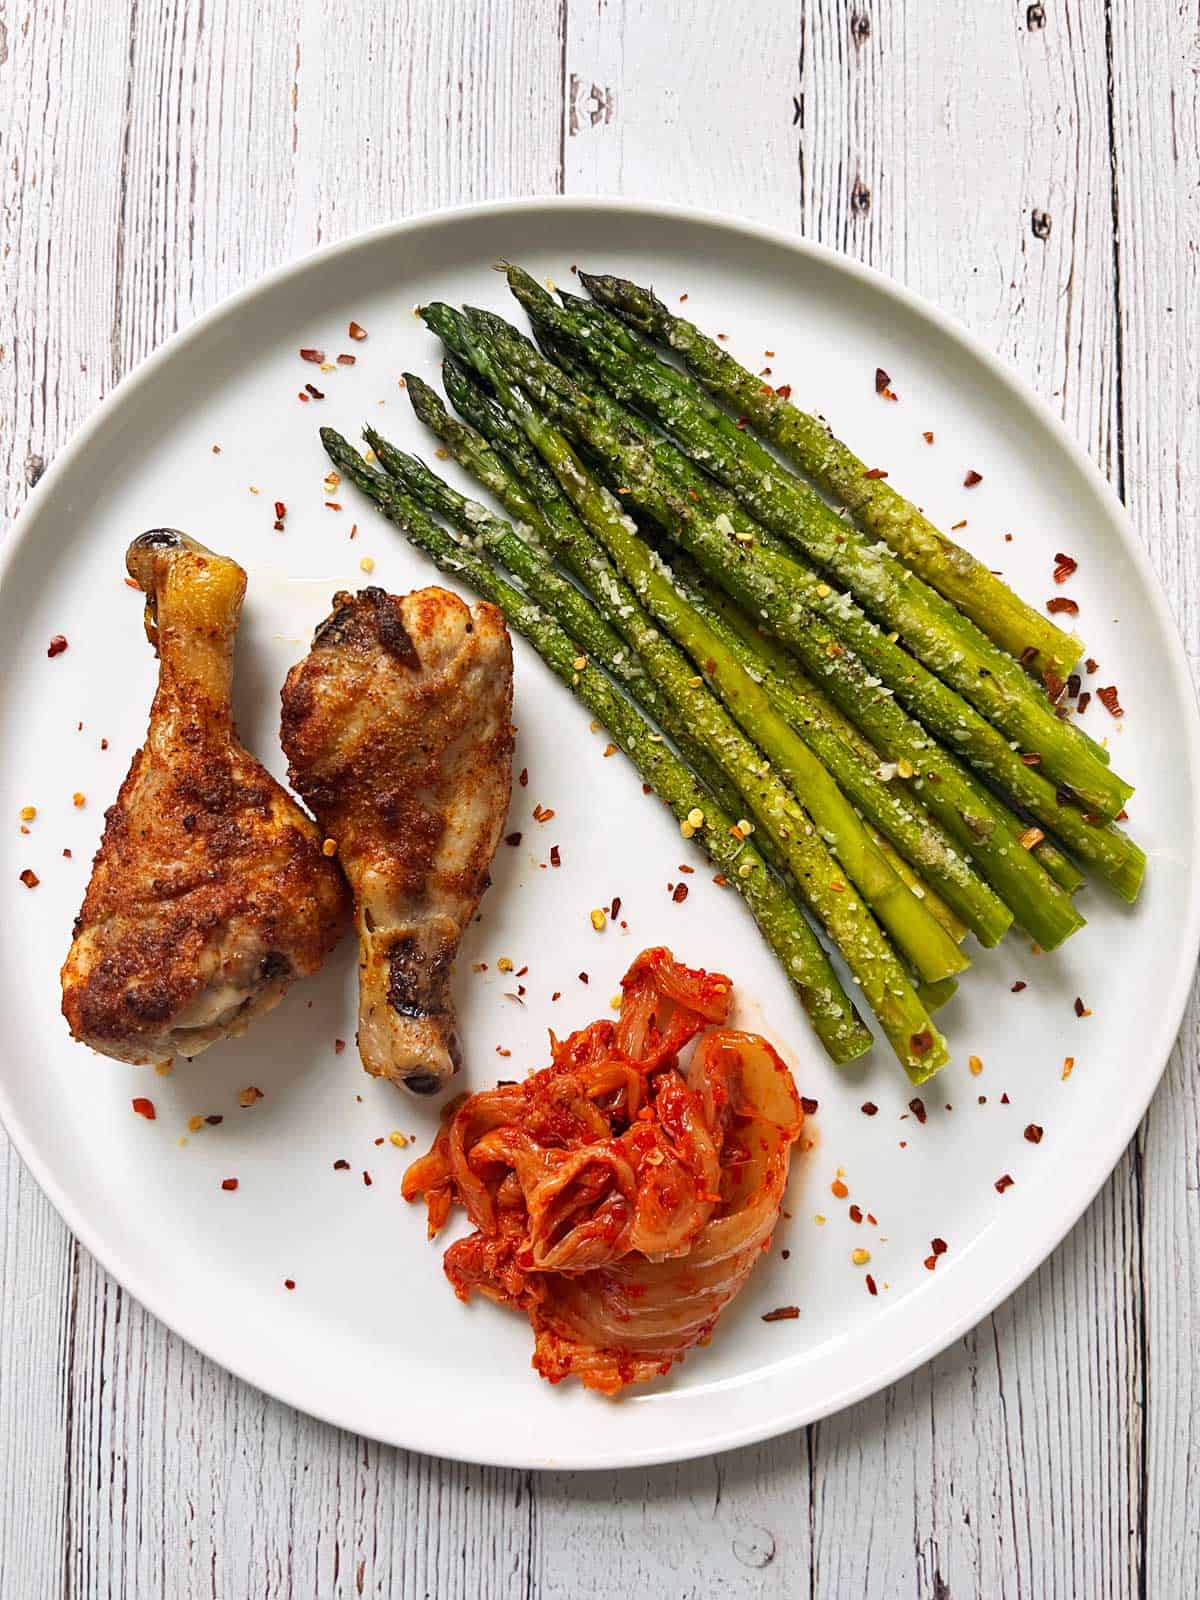 Baked chicken drumsticks are served with roasted asparagus and kimchi.